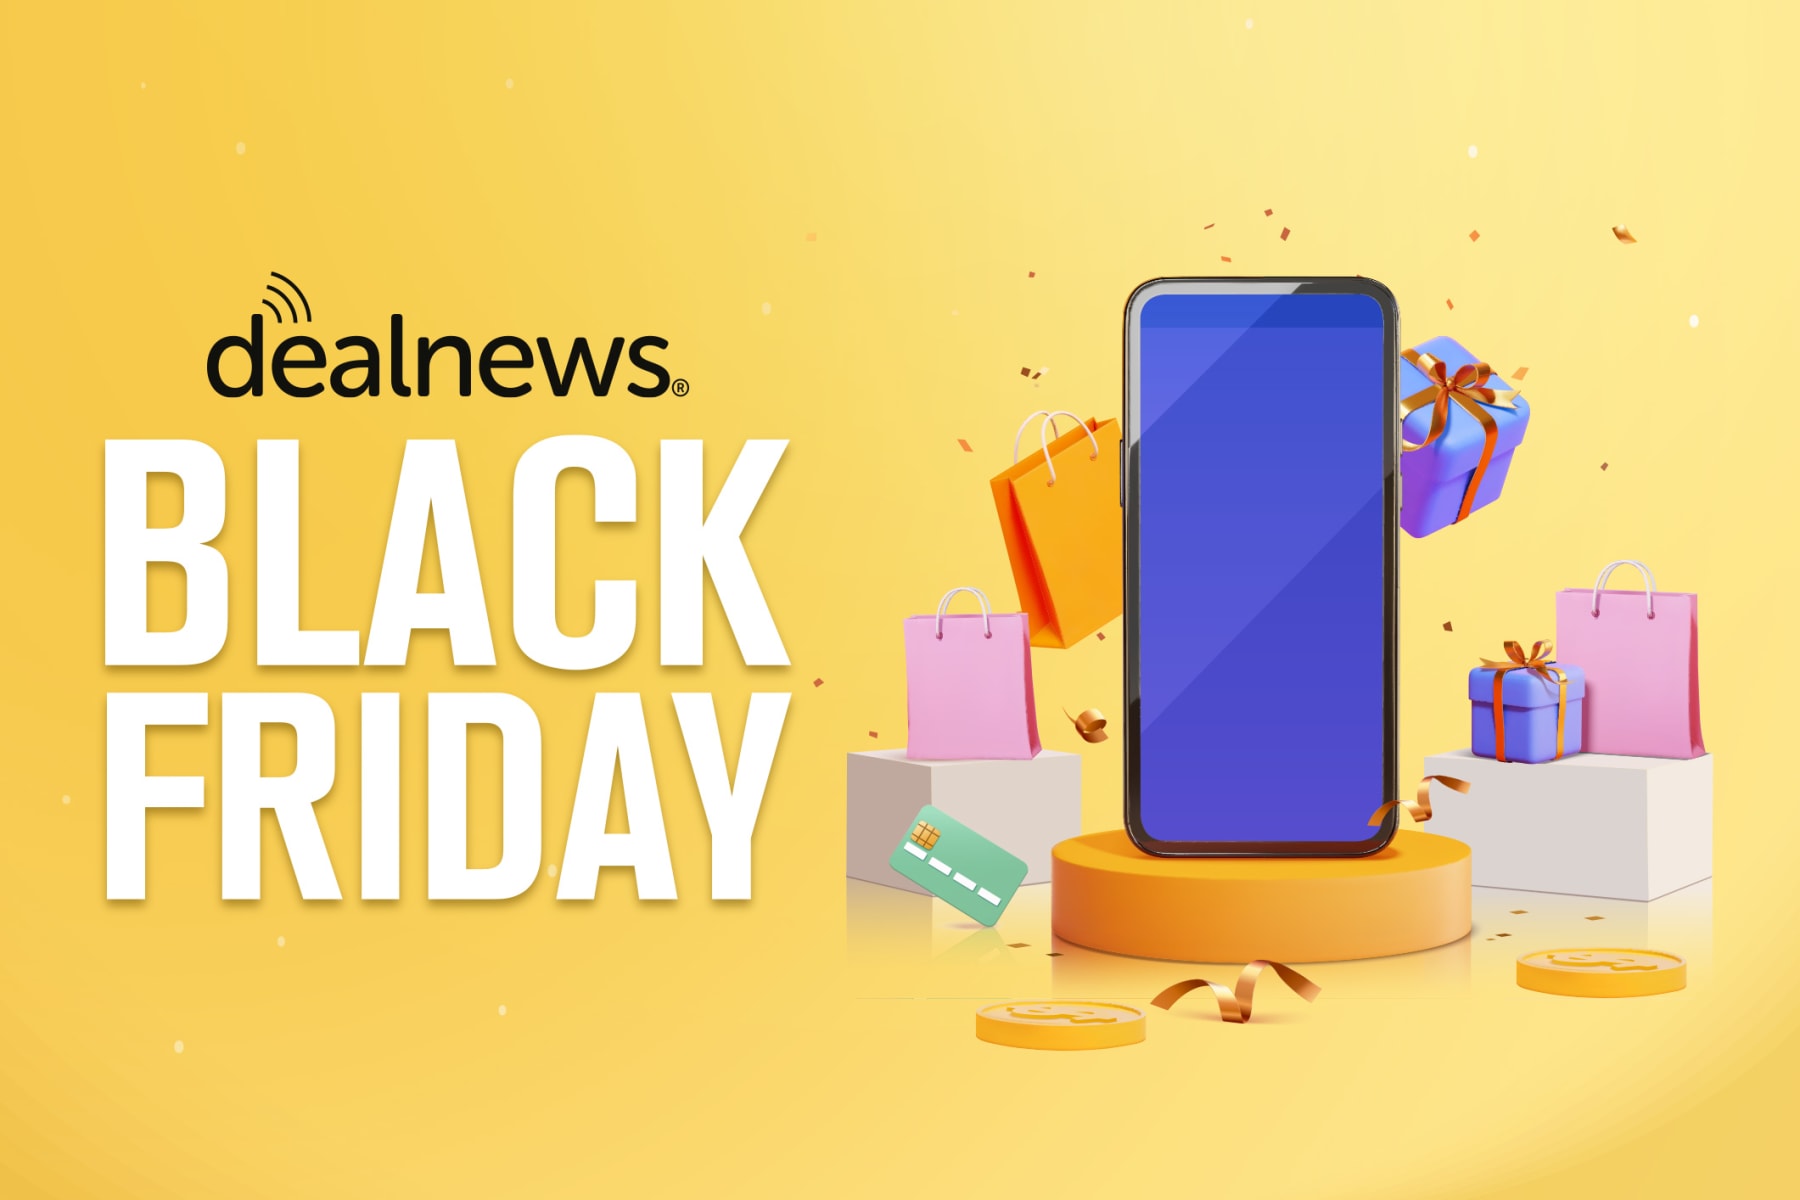 Phone and shopping items sit next to text reading DealNews Black Friday.